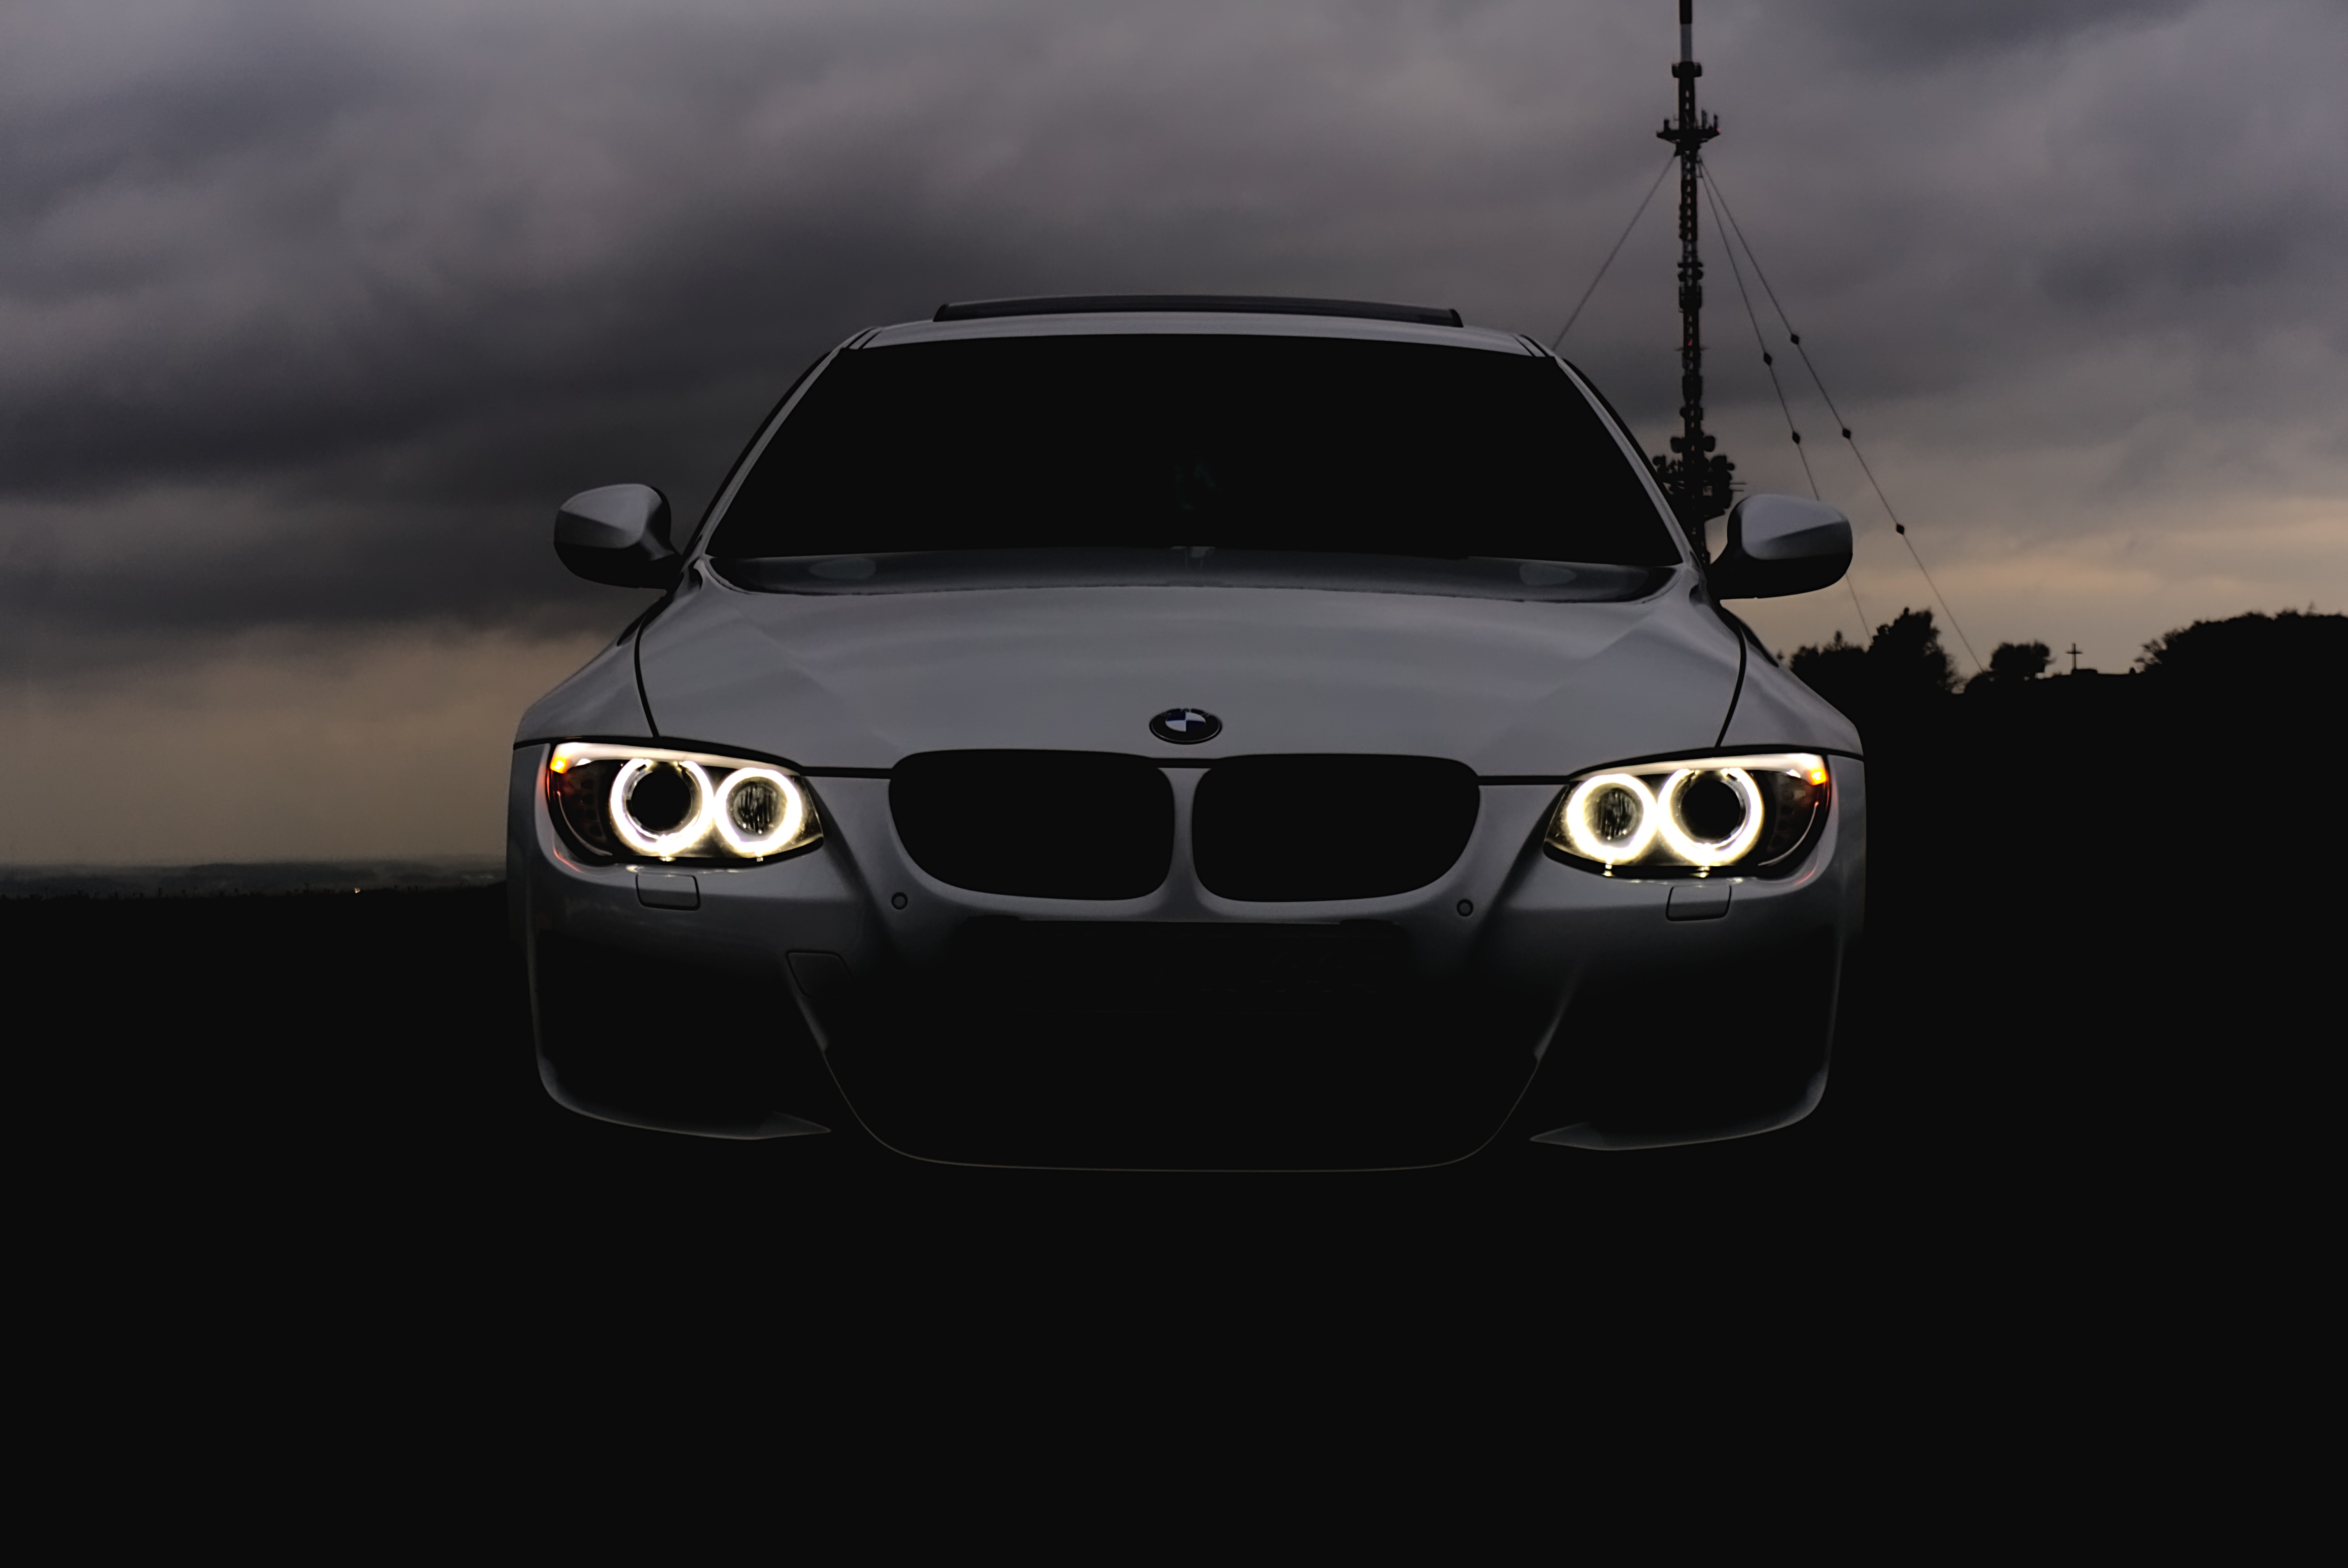 New Lock Screen Wallpapers car, bmw, cars, clouds, lights, mainly cloudy, overcast, headlights